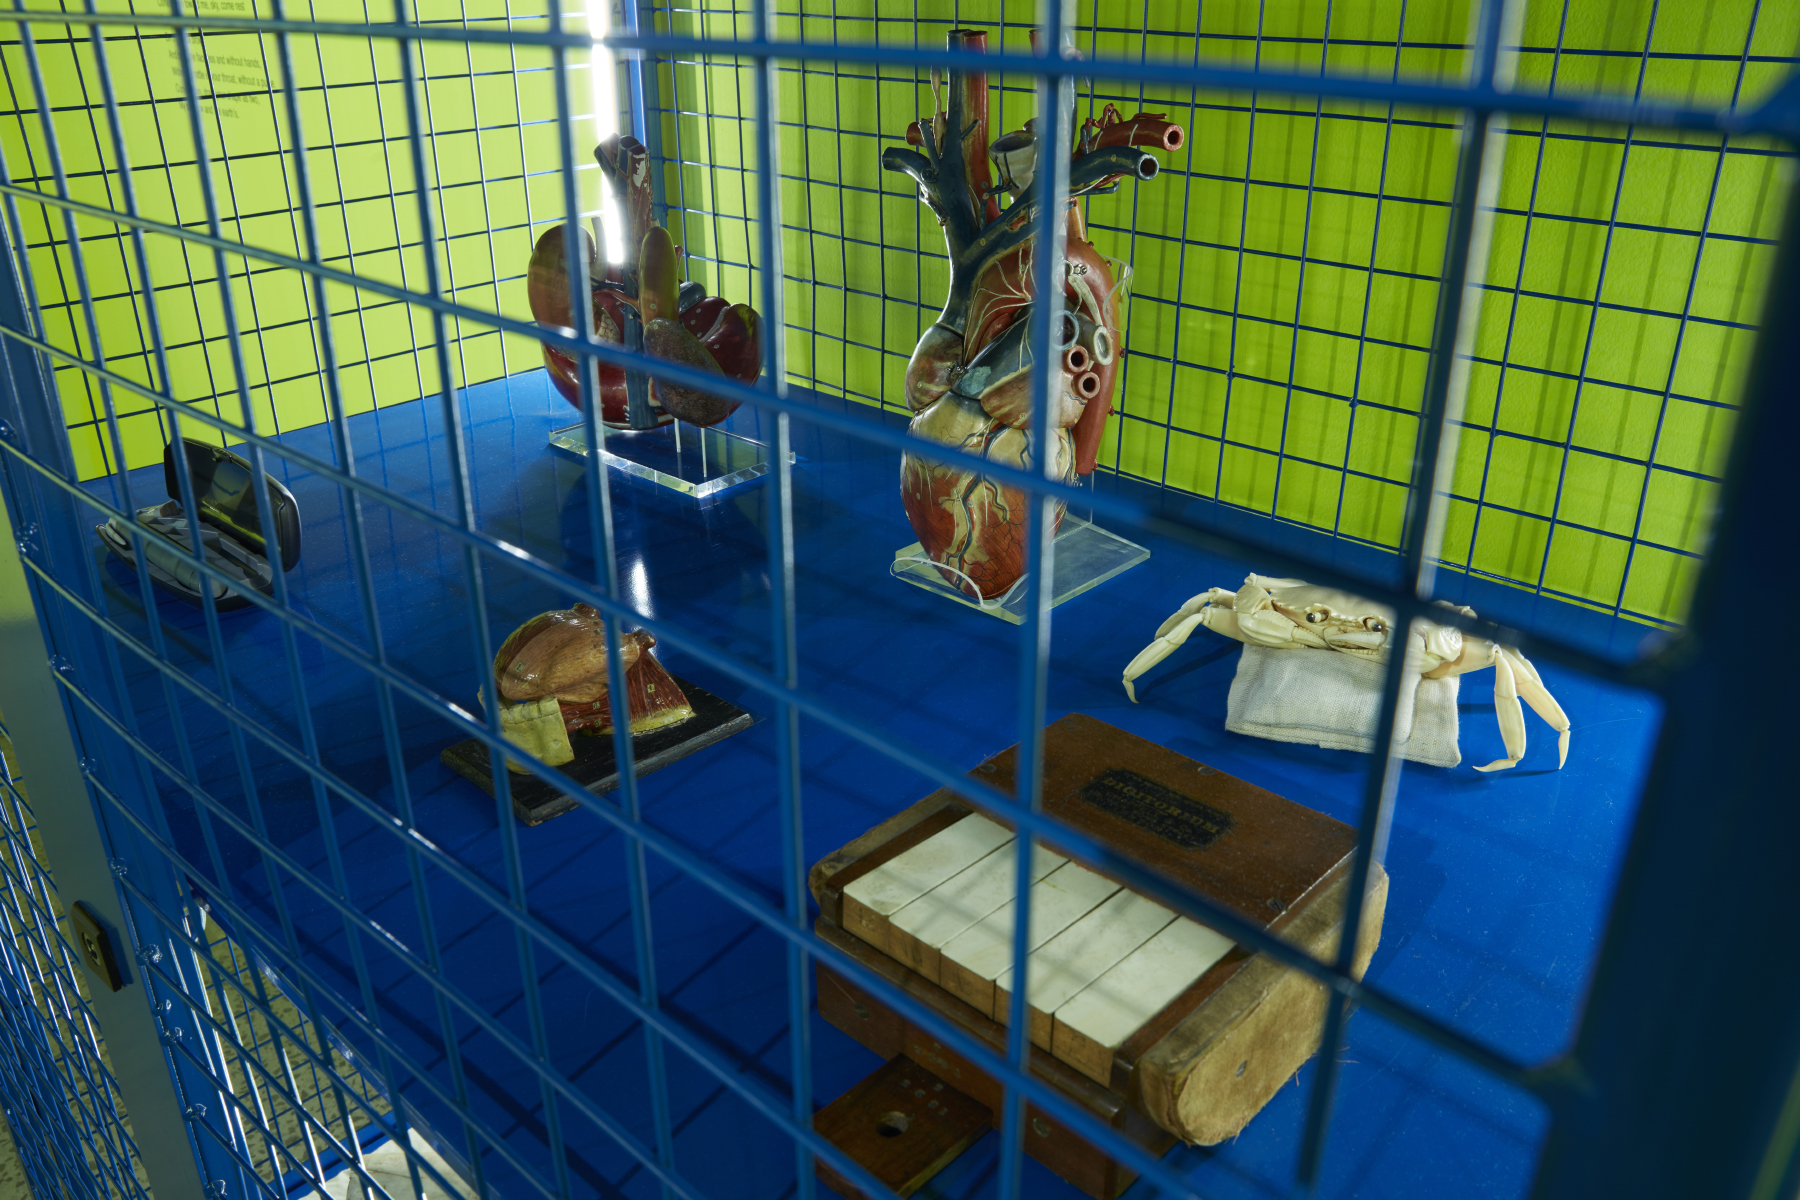 A close up view of the the 'HumaPen' insulin injector, anatomical models, carved ivory crab and Digitorium finger exercise machine on display in a blue storage cage trolley. The storage cage is locked but the objects are visible through the metal lattice. 